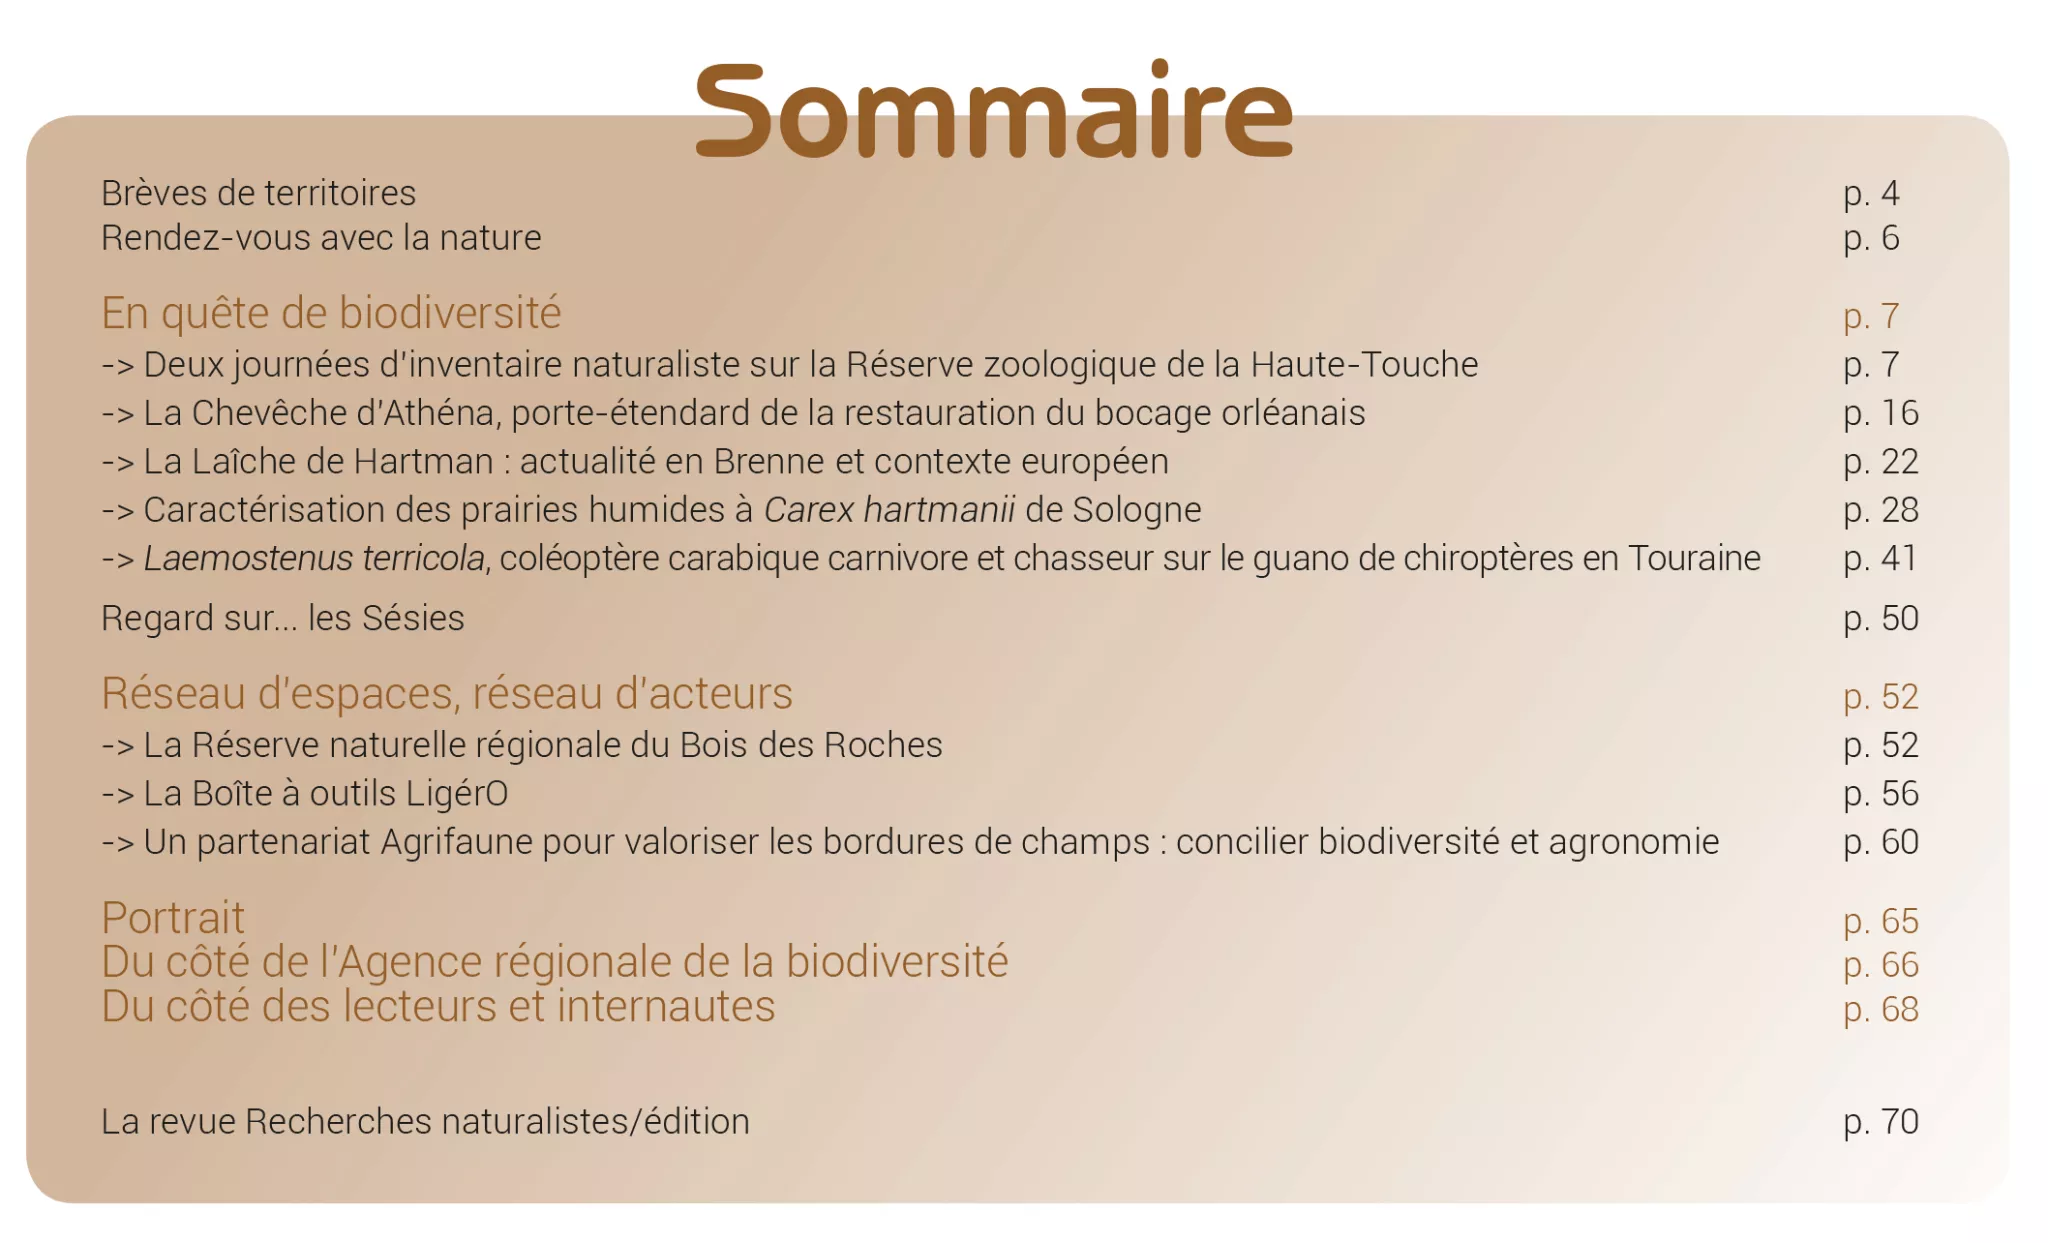 Sommaire RN 08